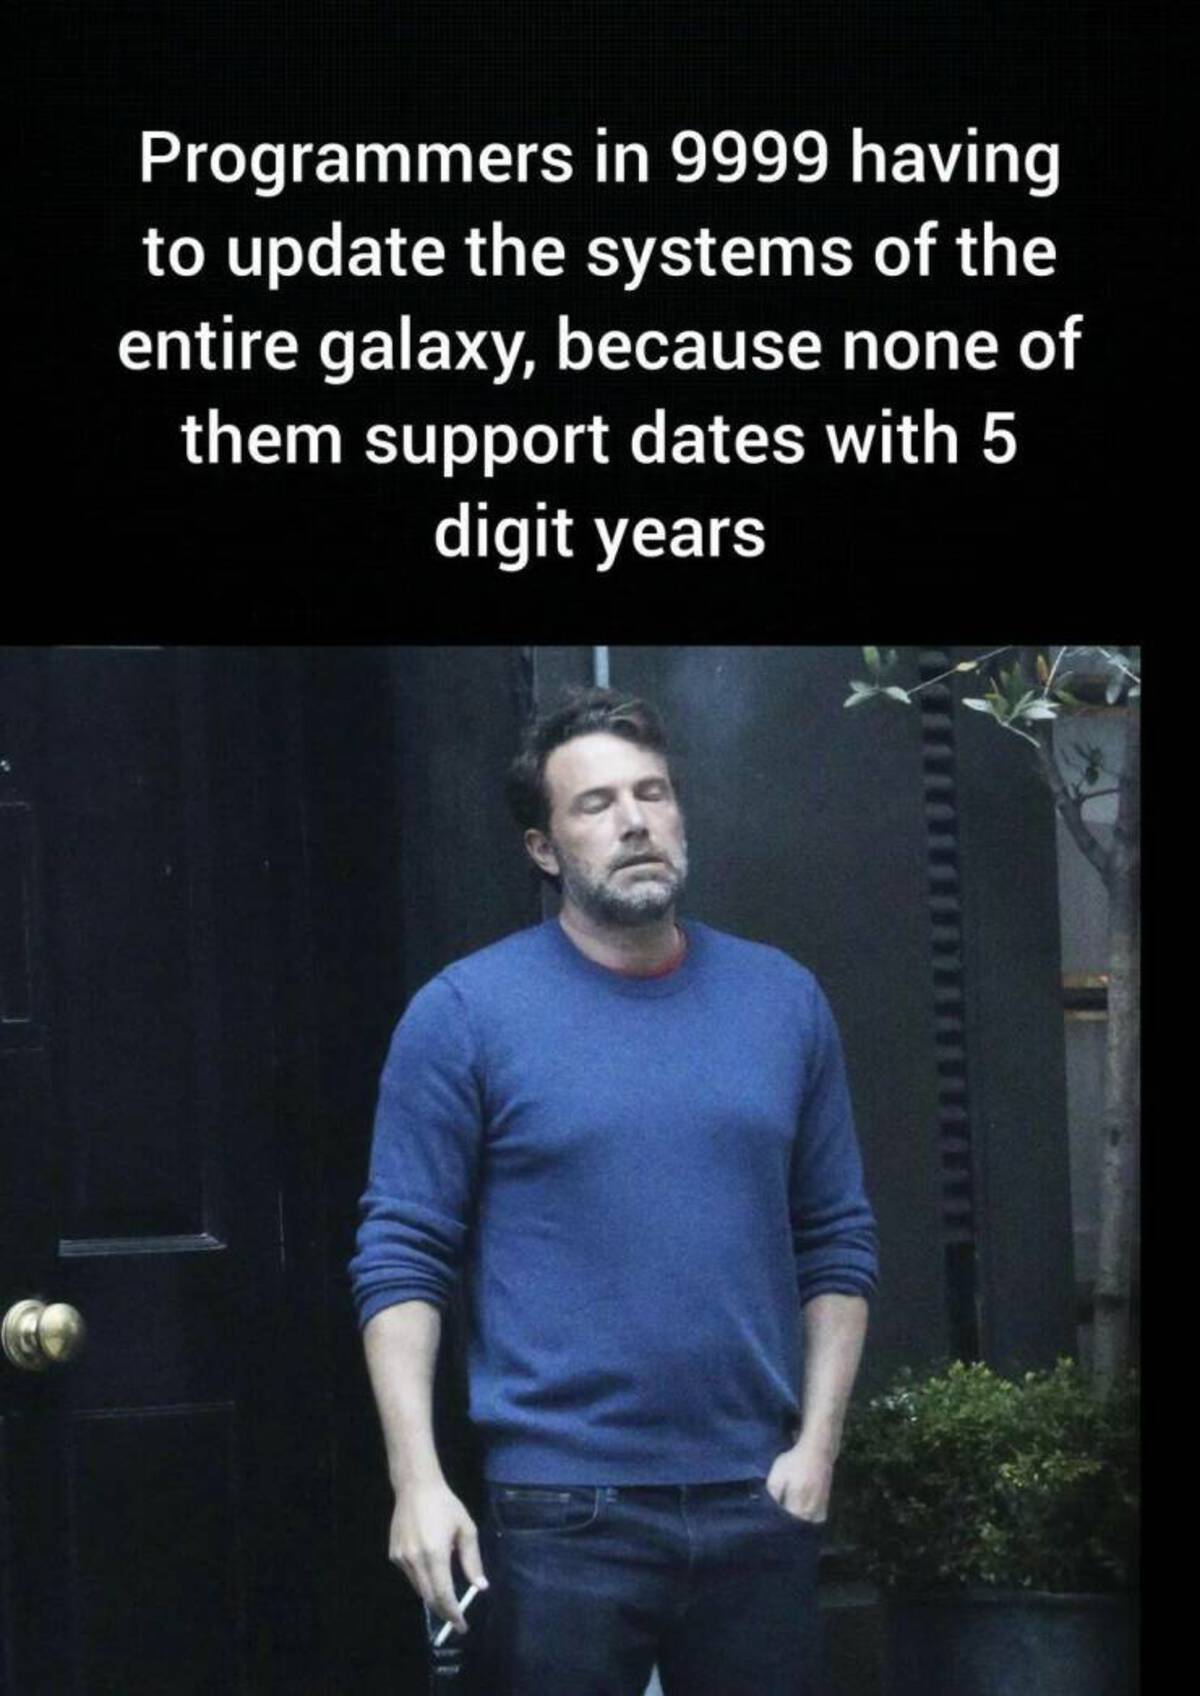 ben affleck meme gif - Programmers in 9999 having to update the systems of the entire galaxy, because none of them support dates with 5 digit years